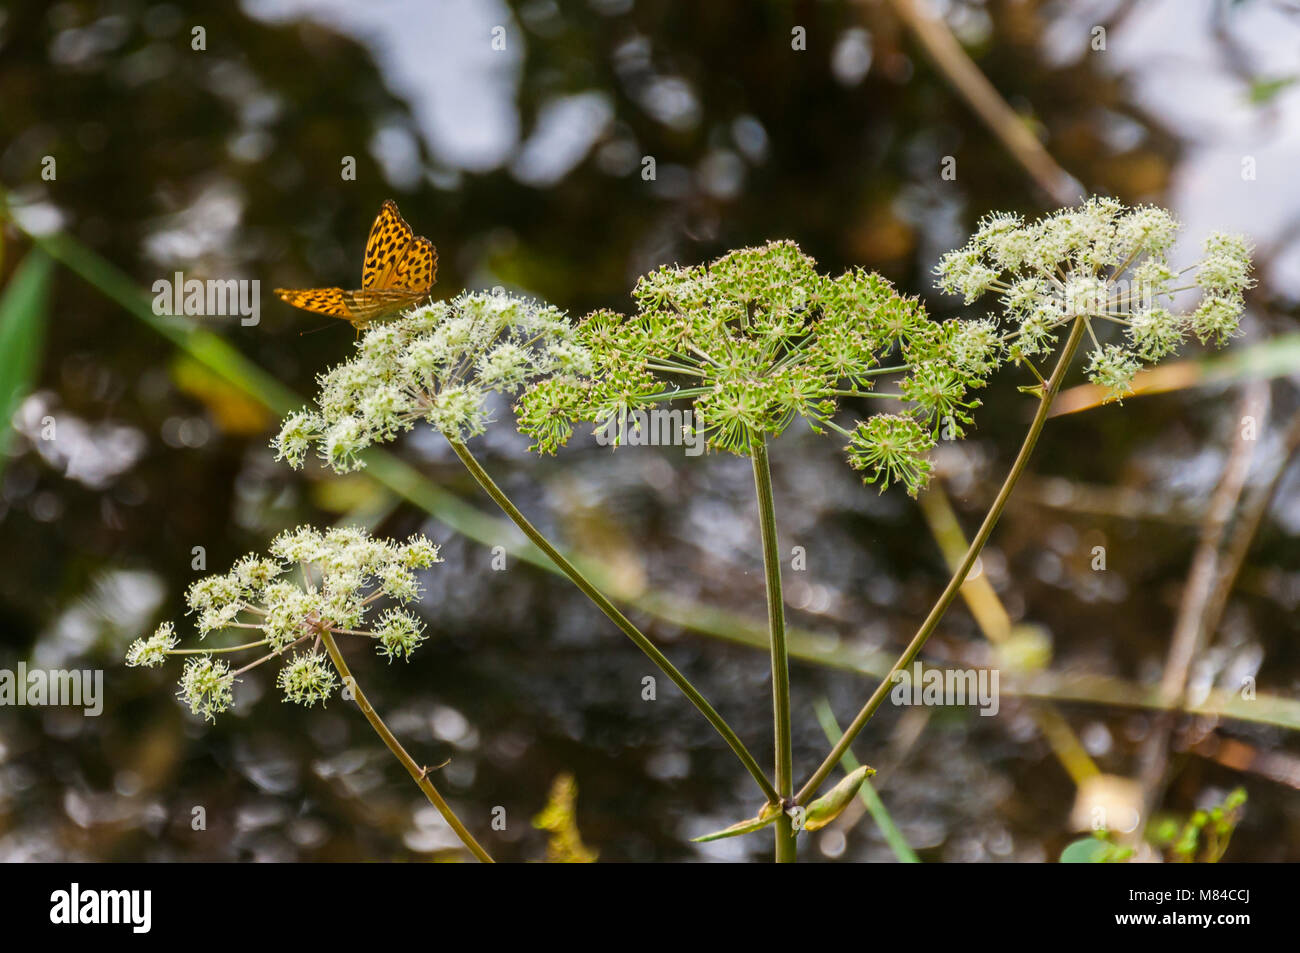 Yellow spotted butterfly insect sitting on dill plant Stock Photo